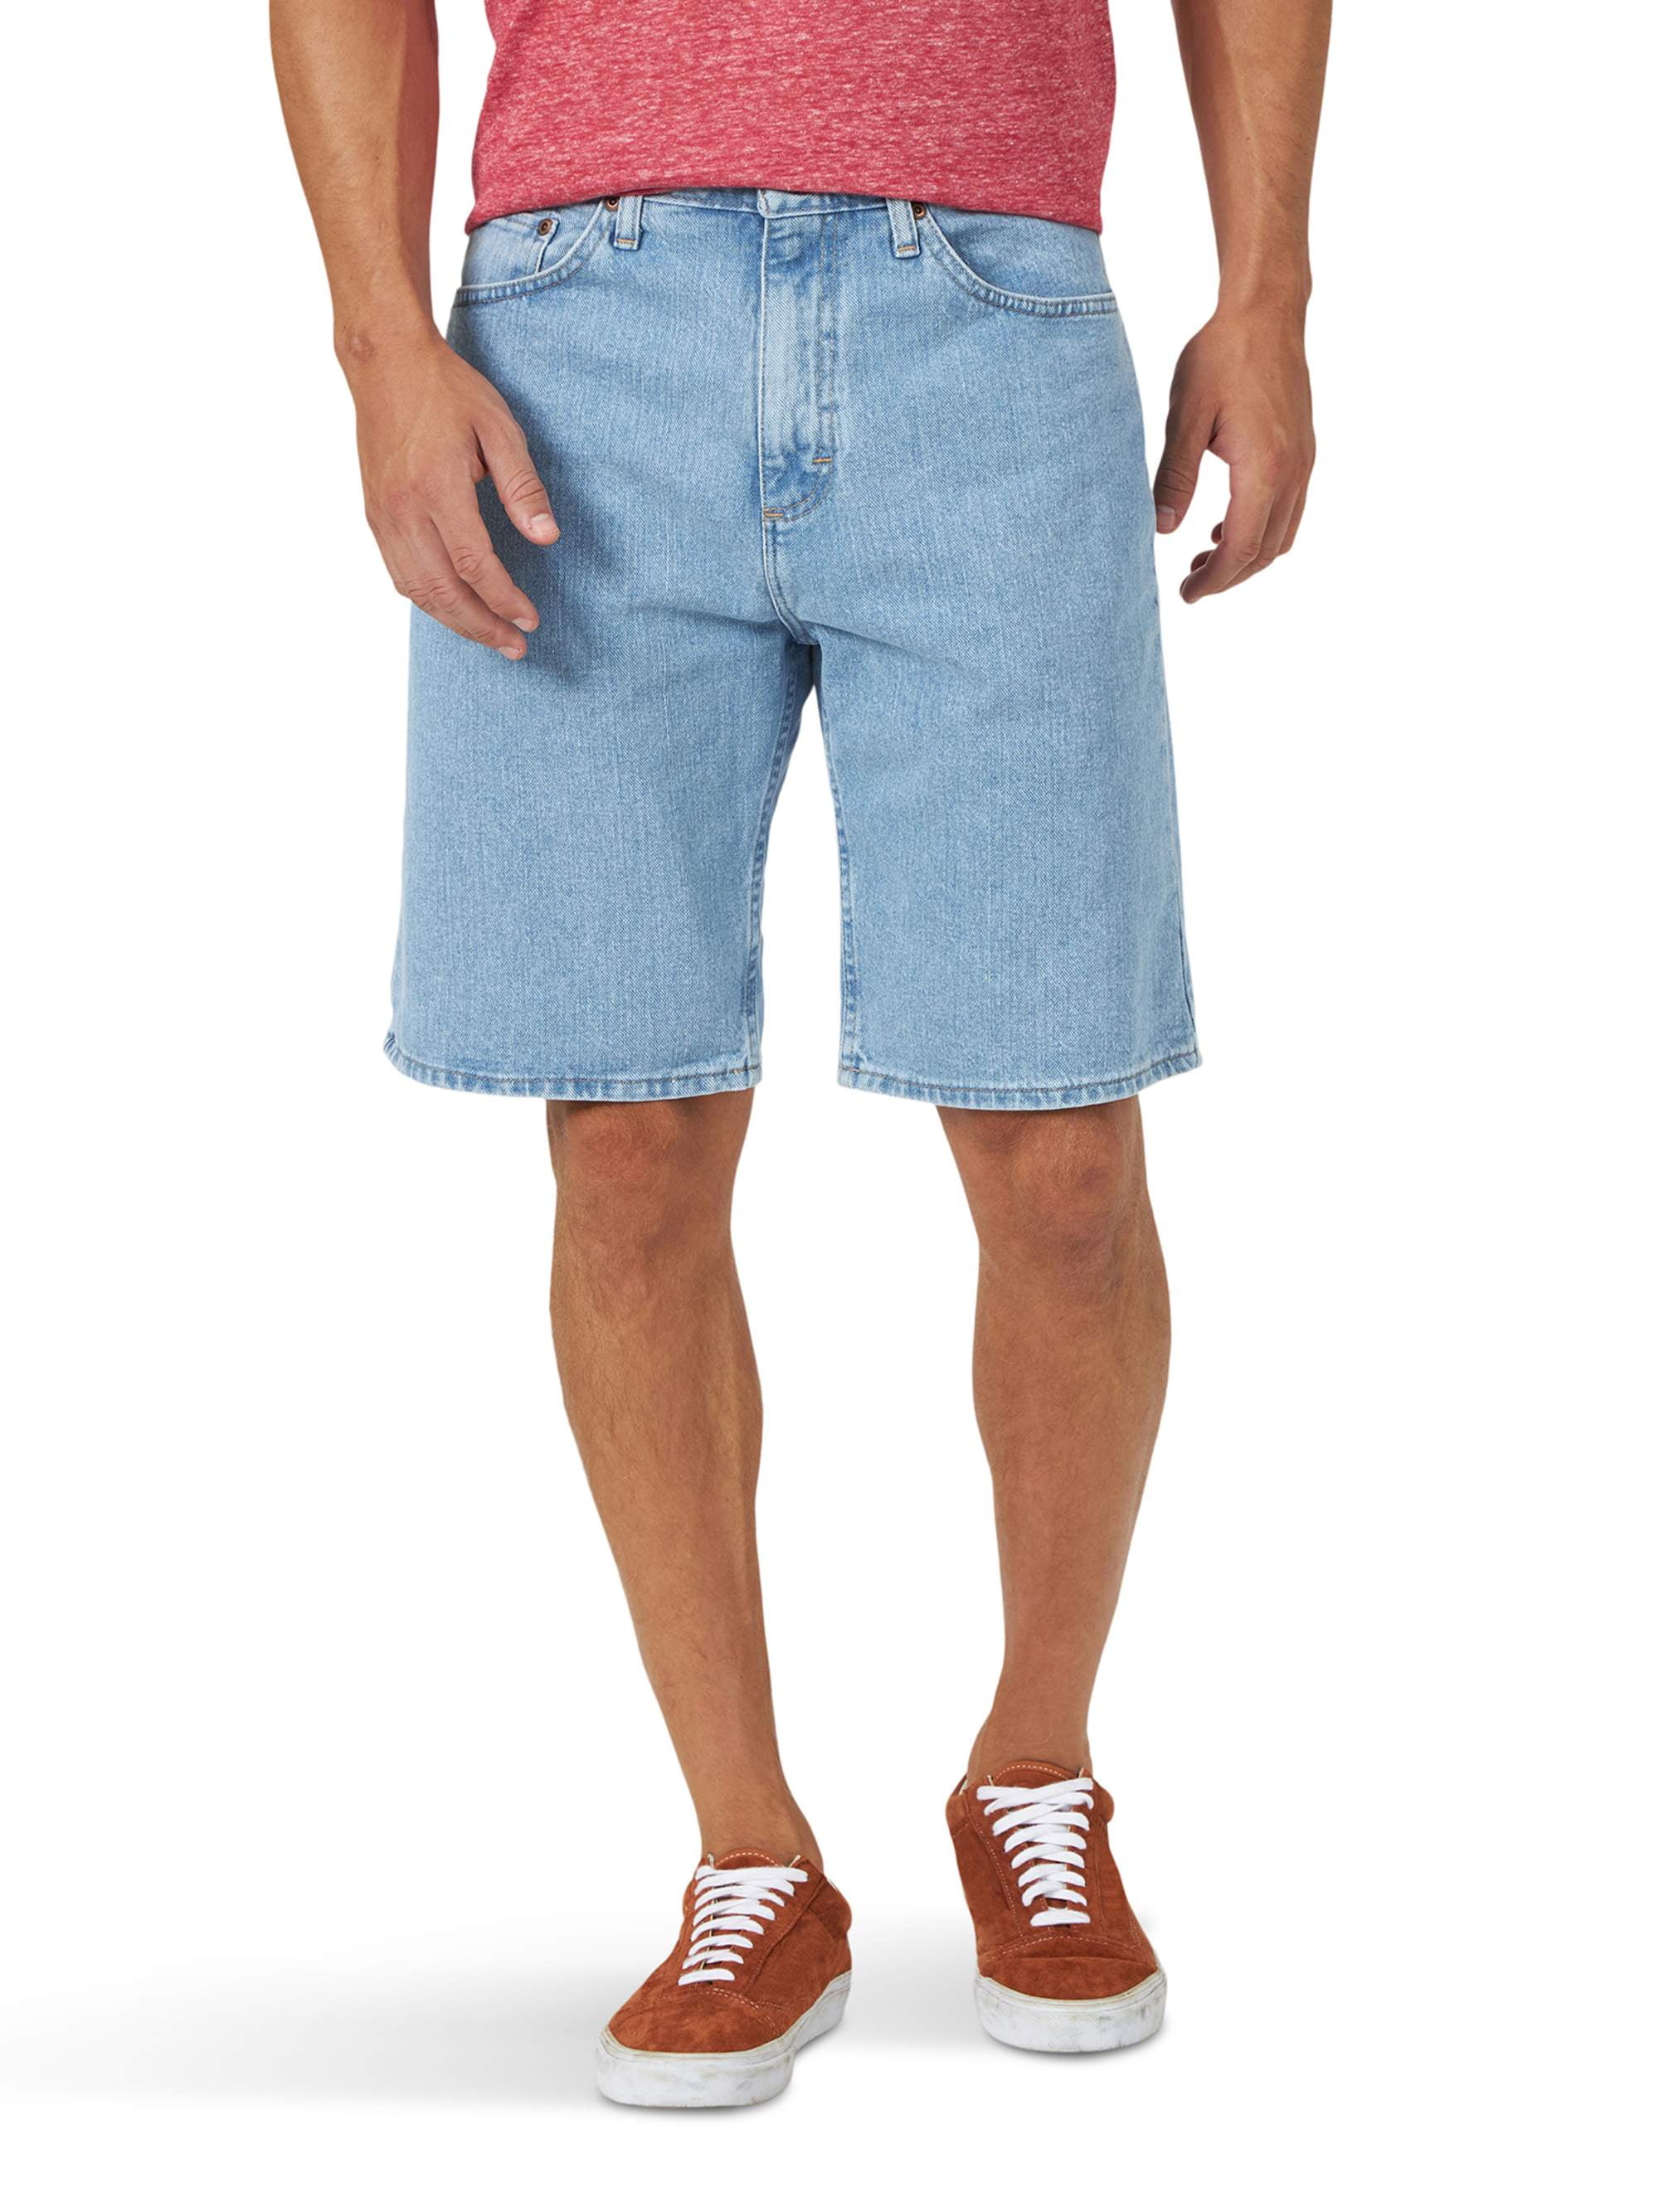 authentic issue wrangler real comfortable jeans shorts